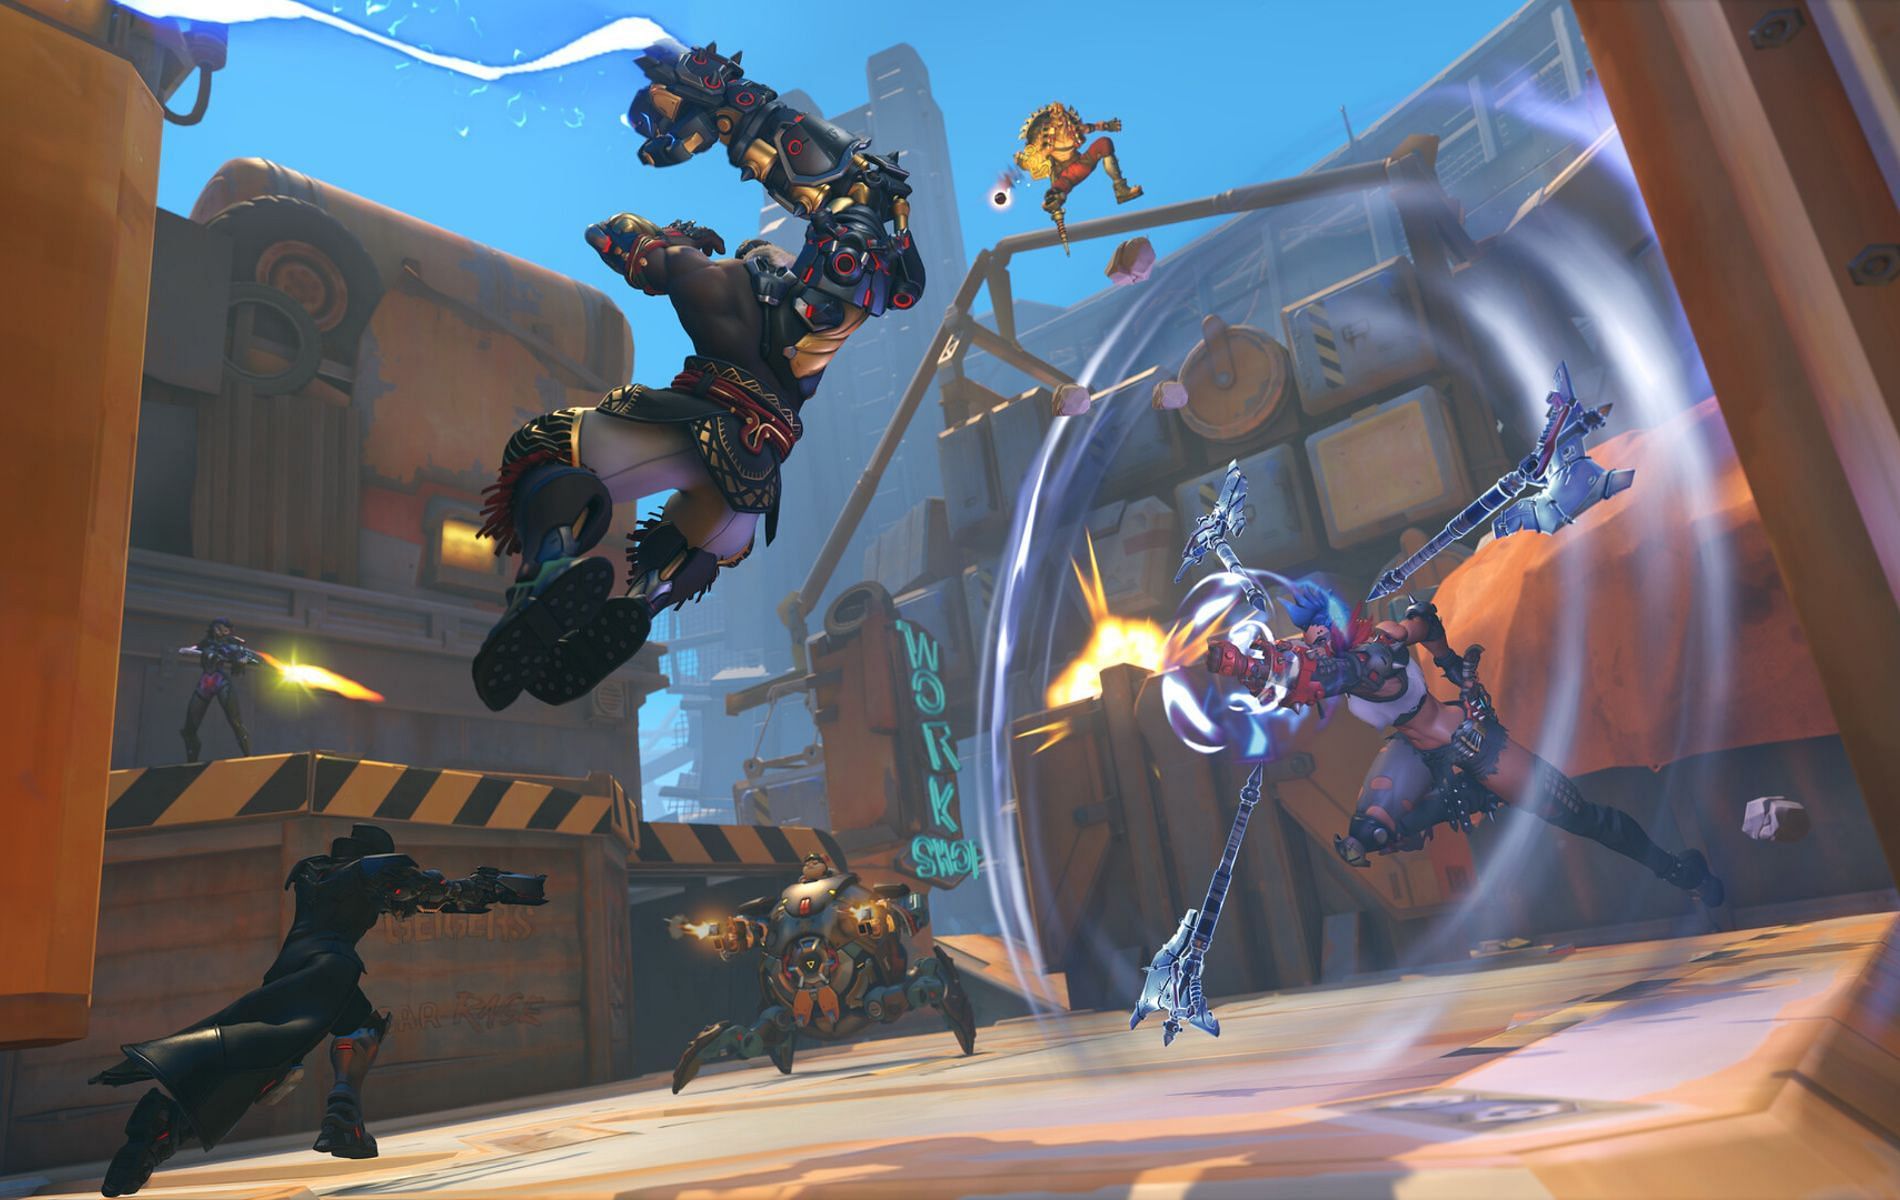 Promotional screenshot for Overwatch 2